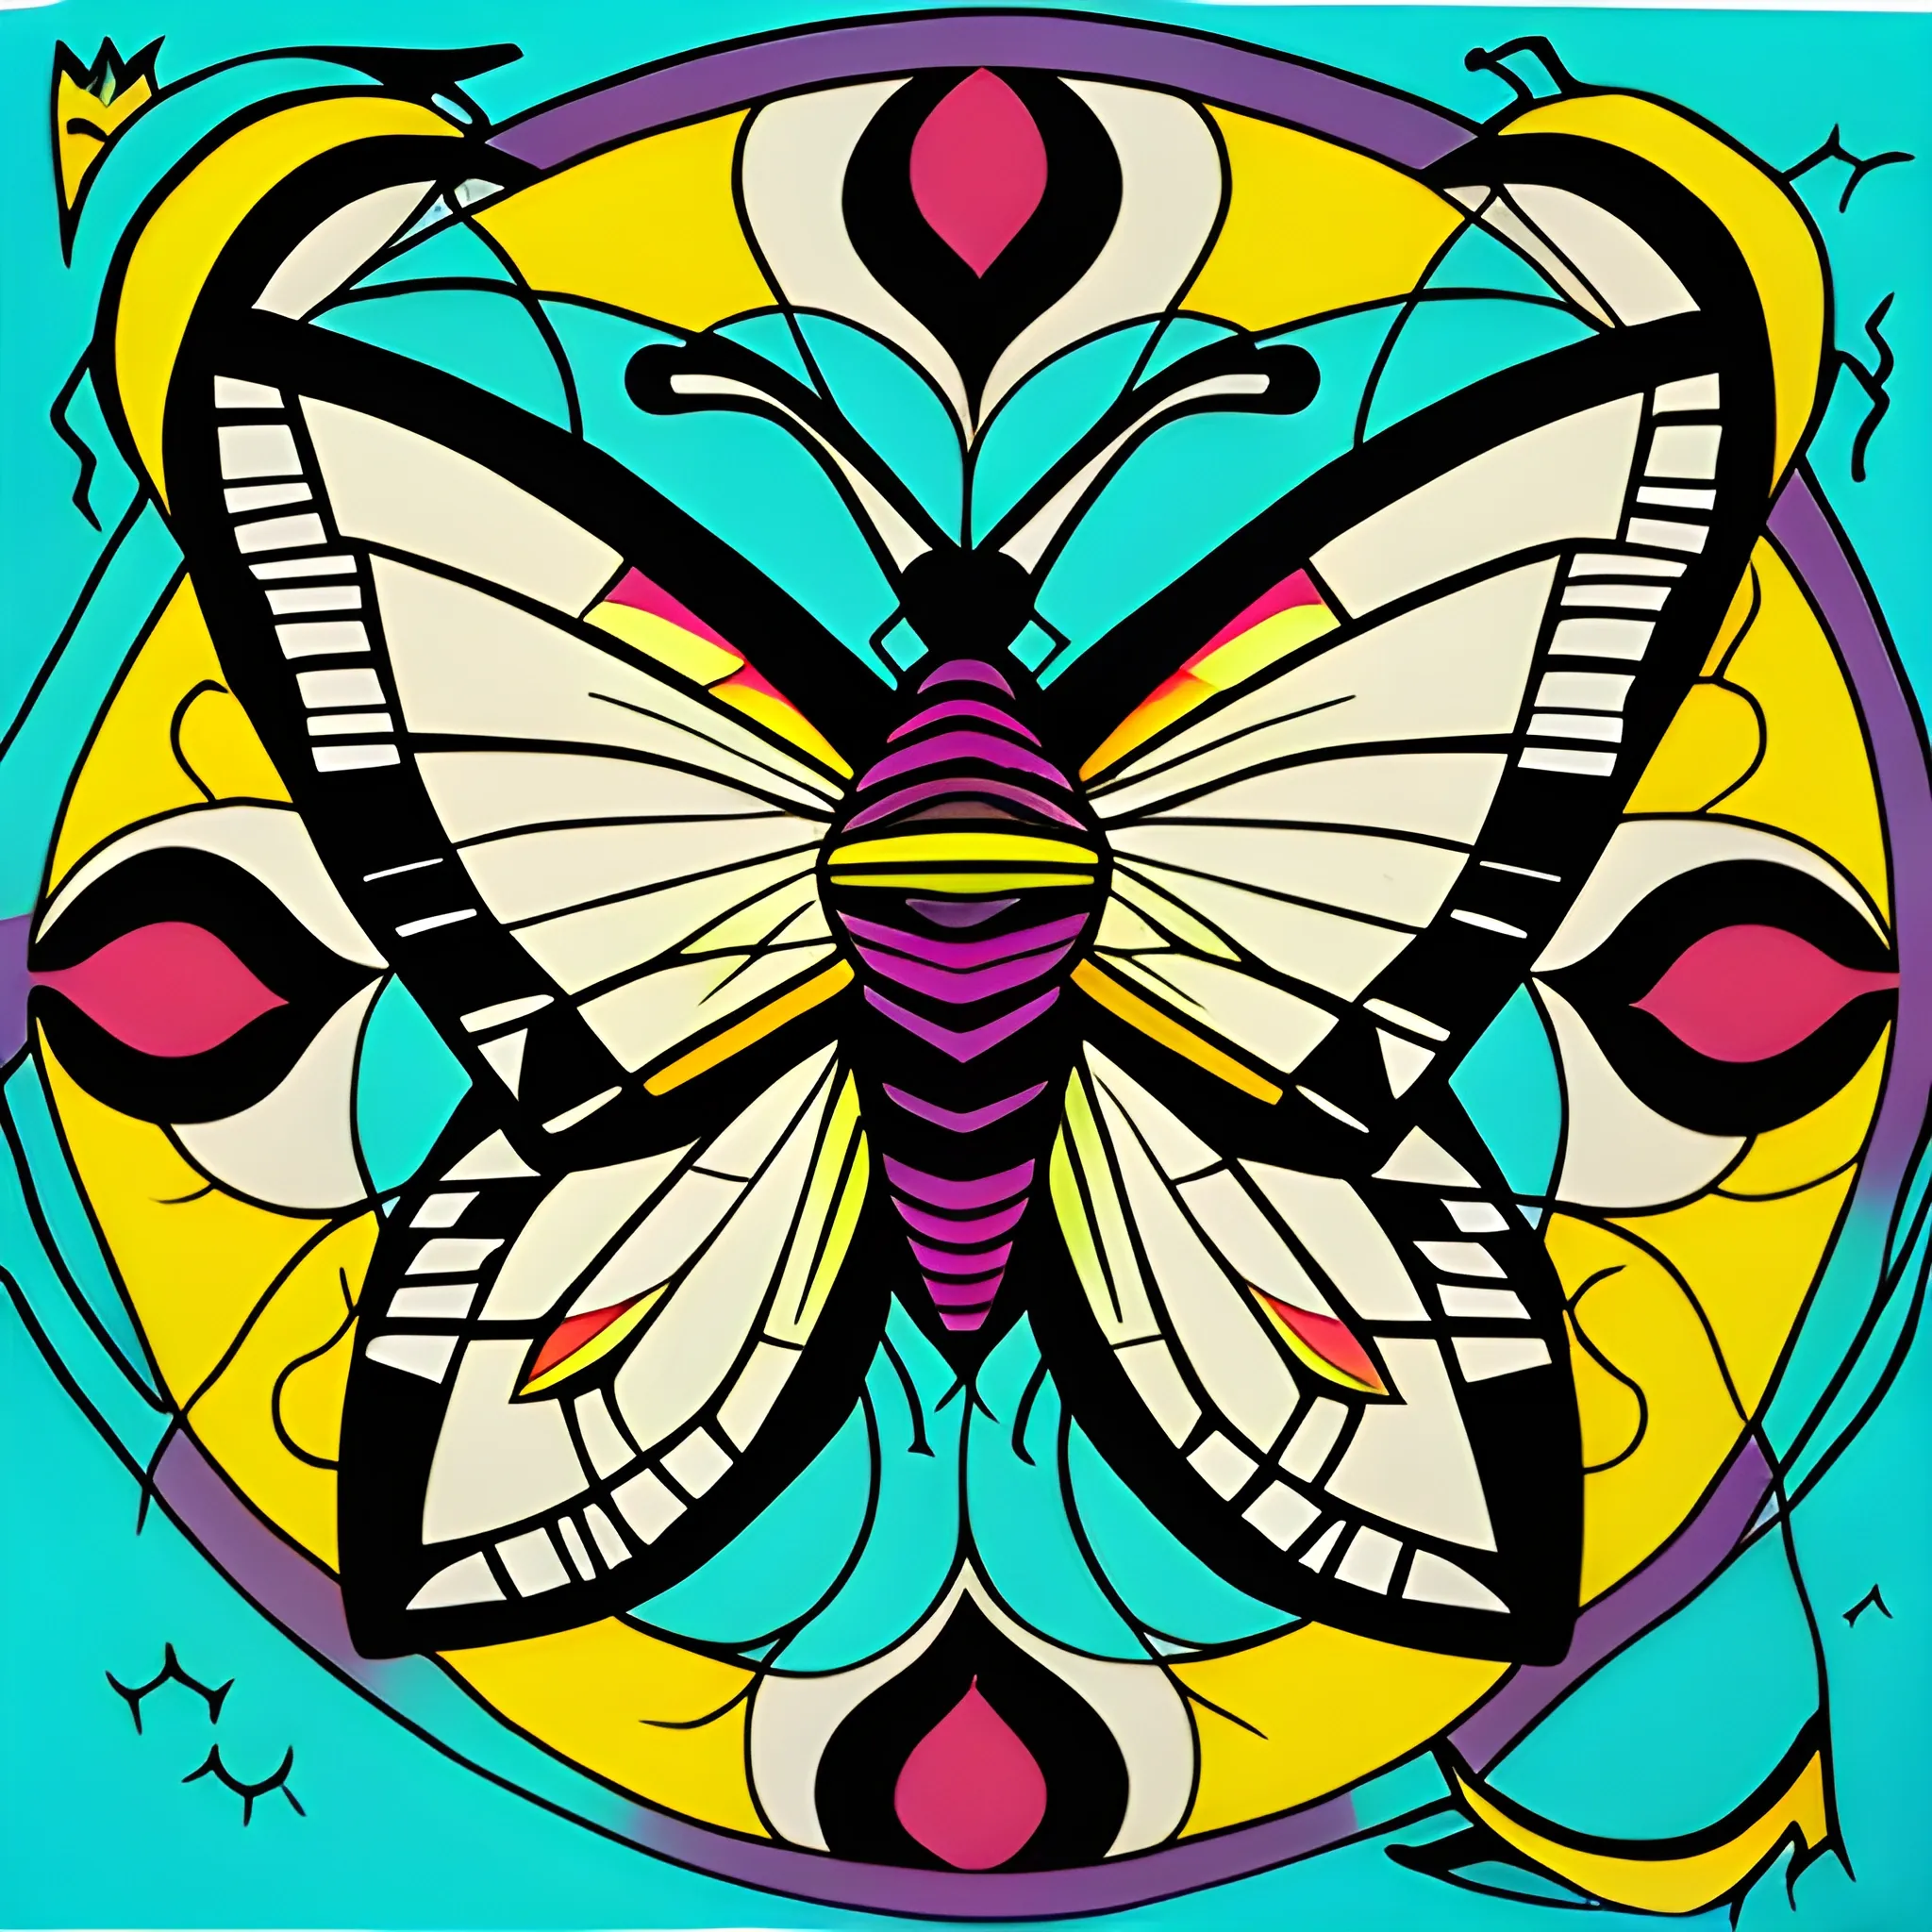 a side moth using a "Tschabalala Self" style of art. specifically using the example of the work art named "floor dance"